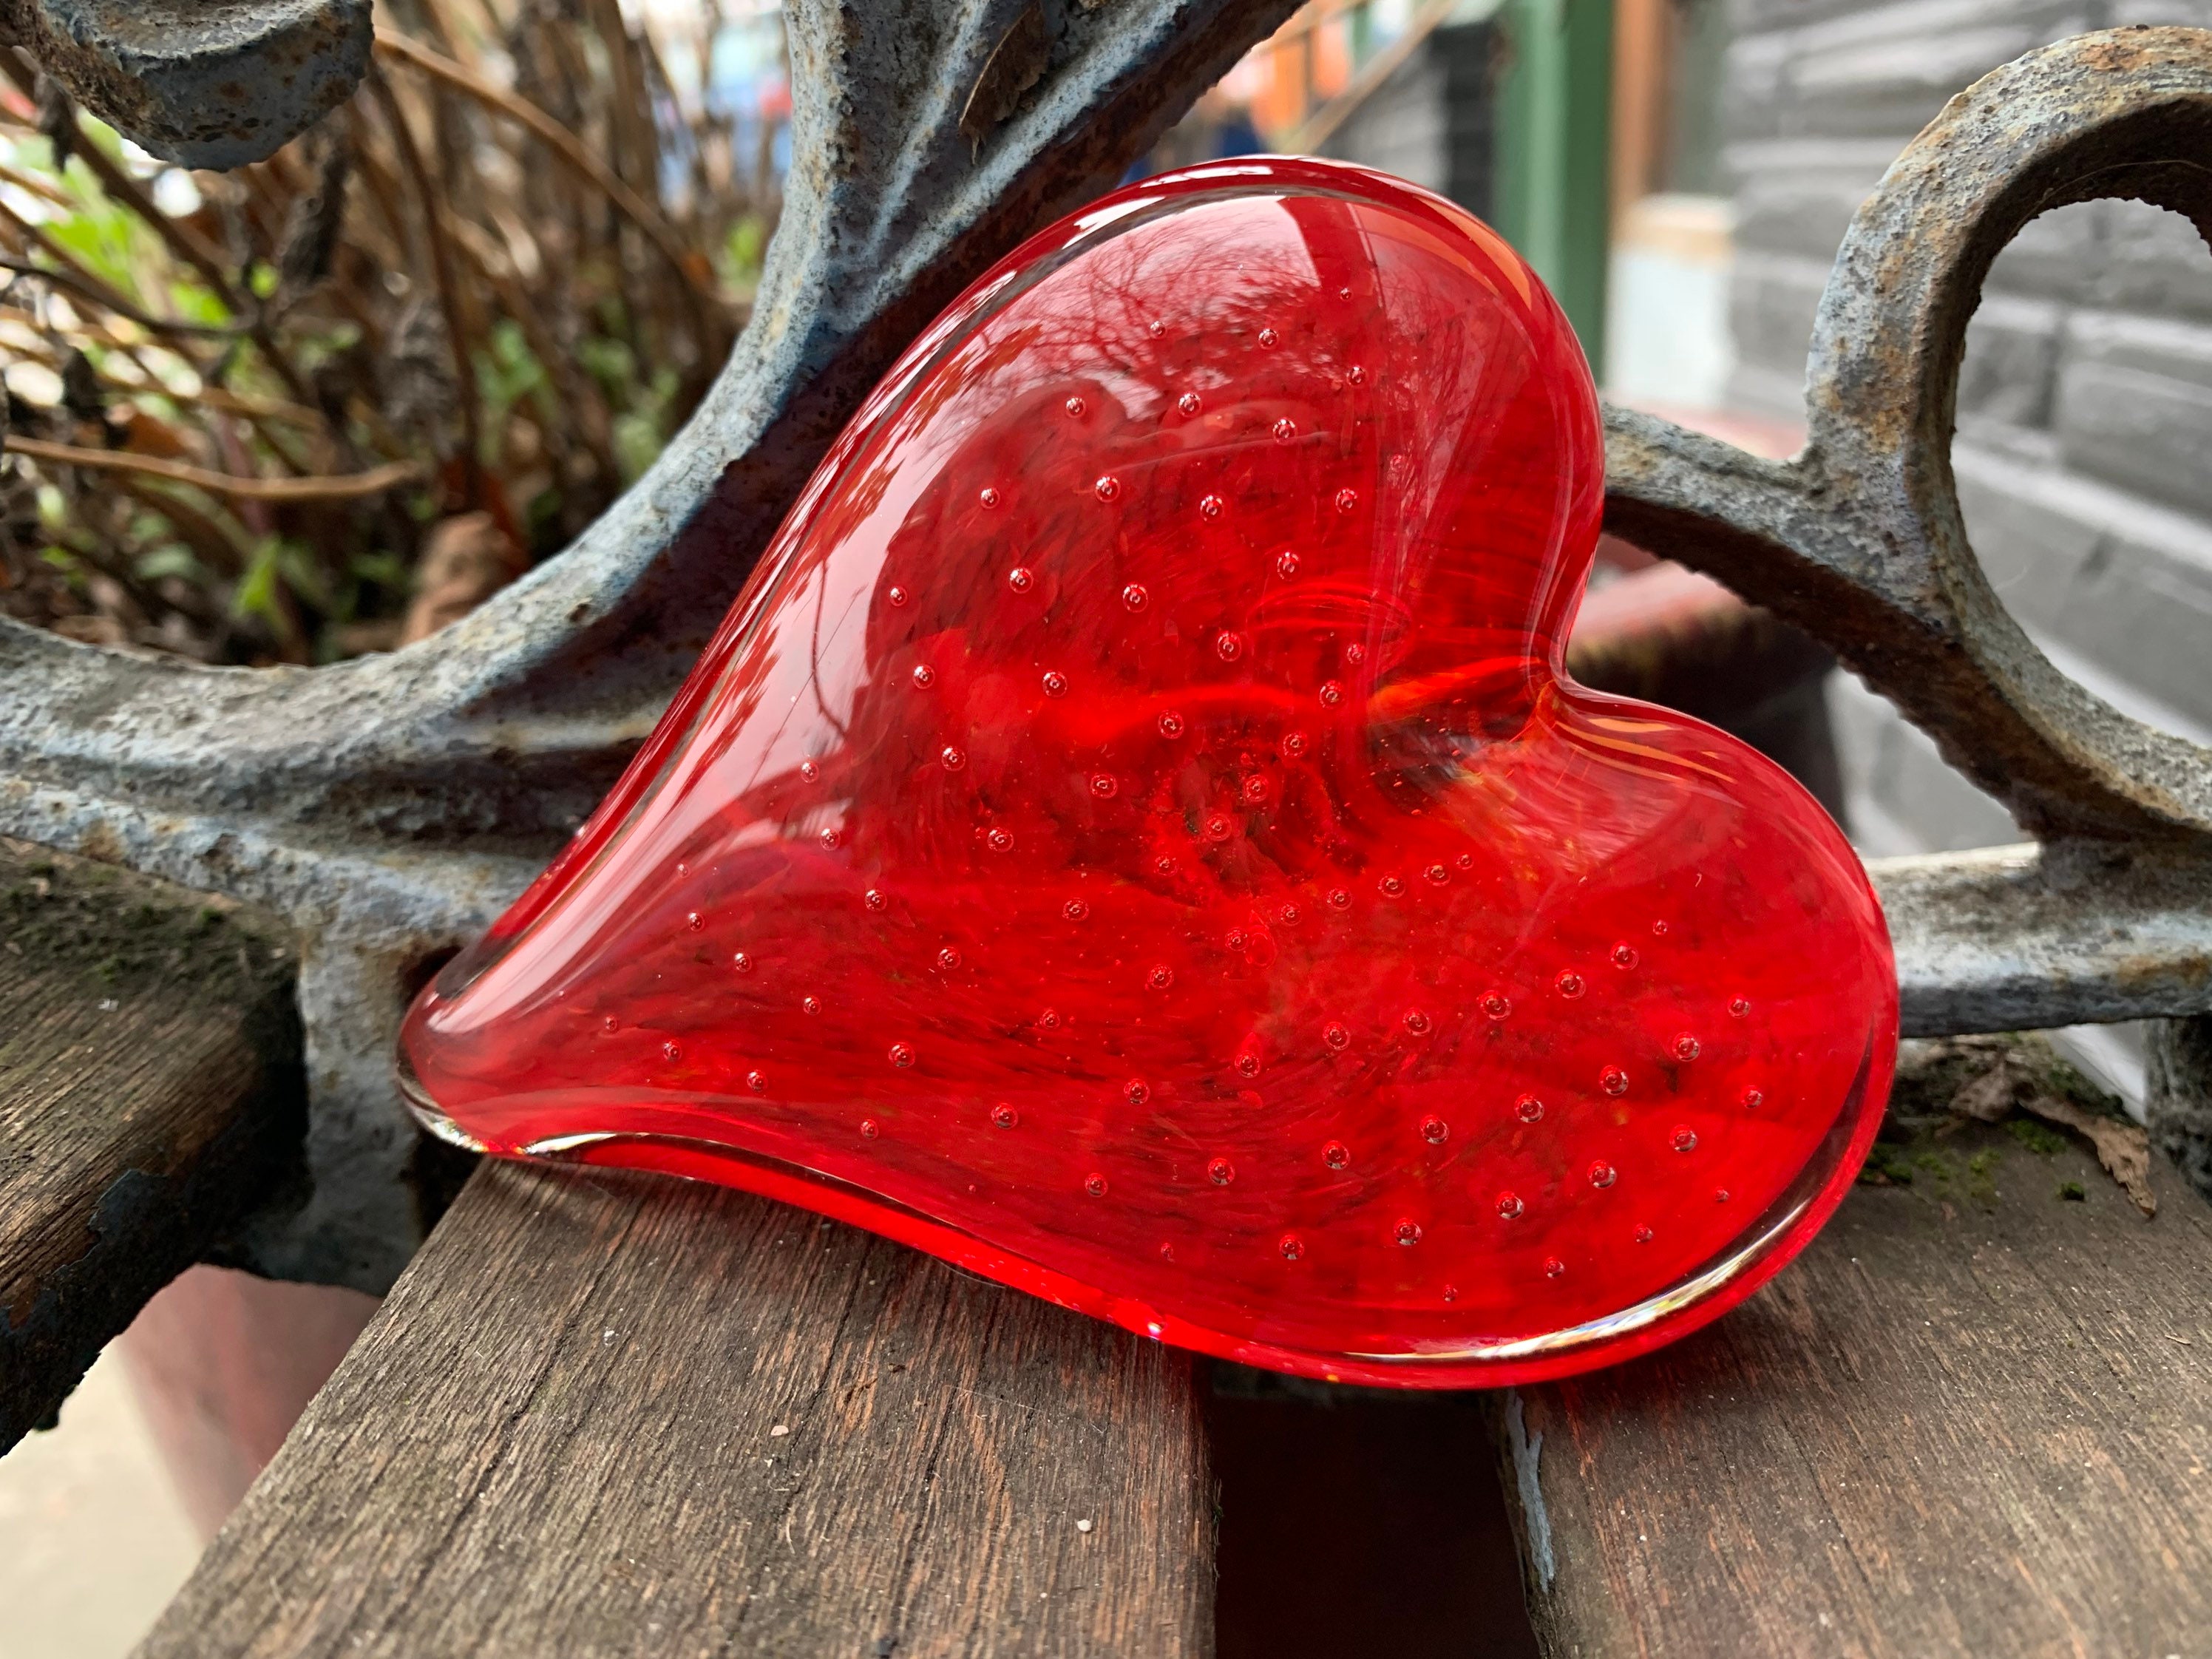 Swirled Red Glass Heart Sculptural Paperweight